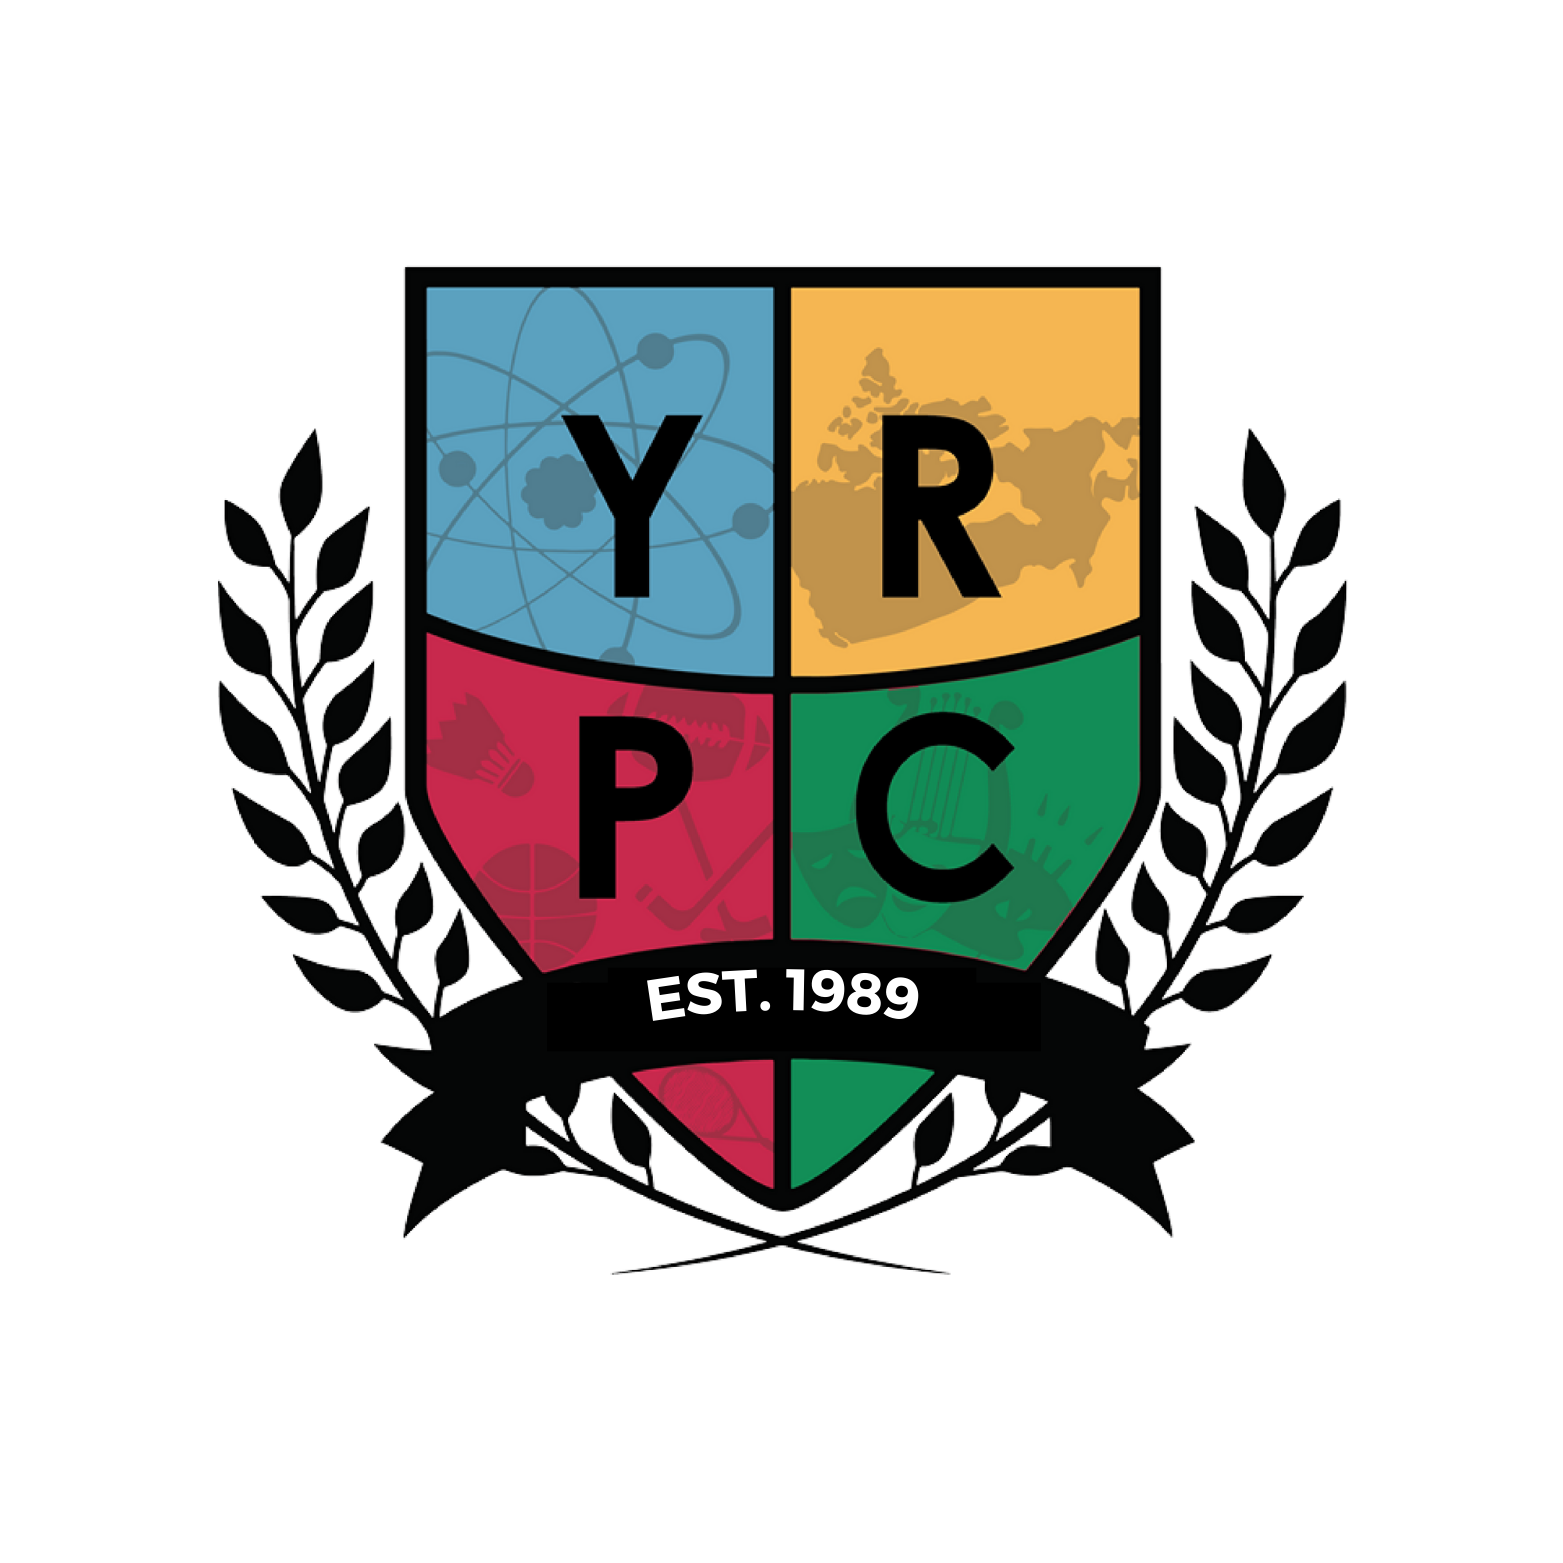 crest shape with letters YRPC and established 1989 in banner across the bottom